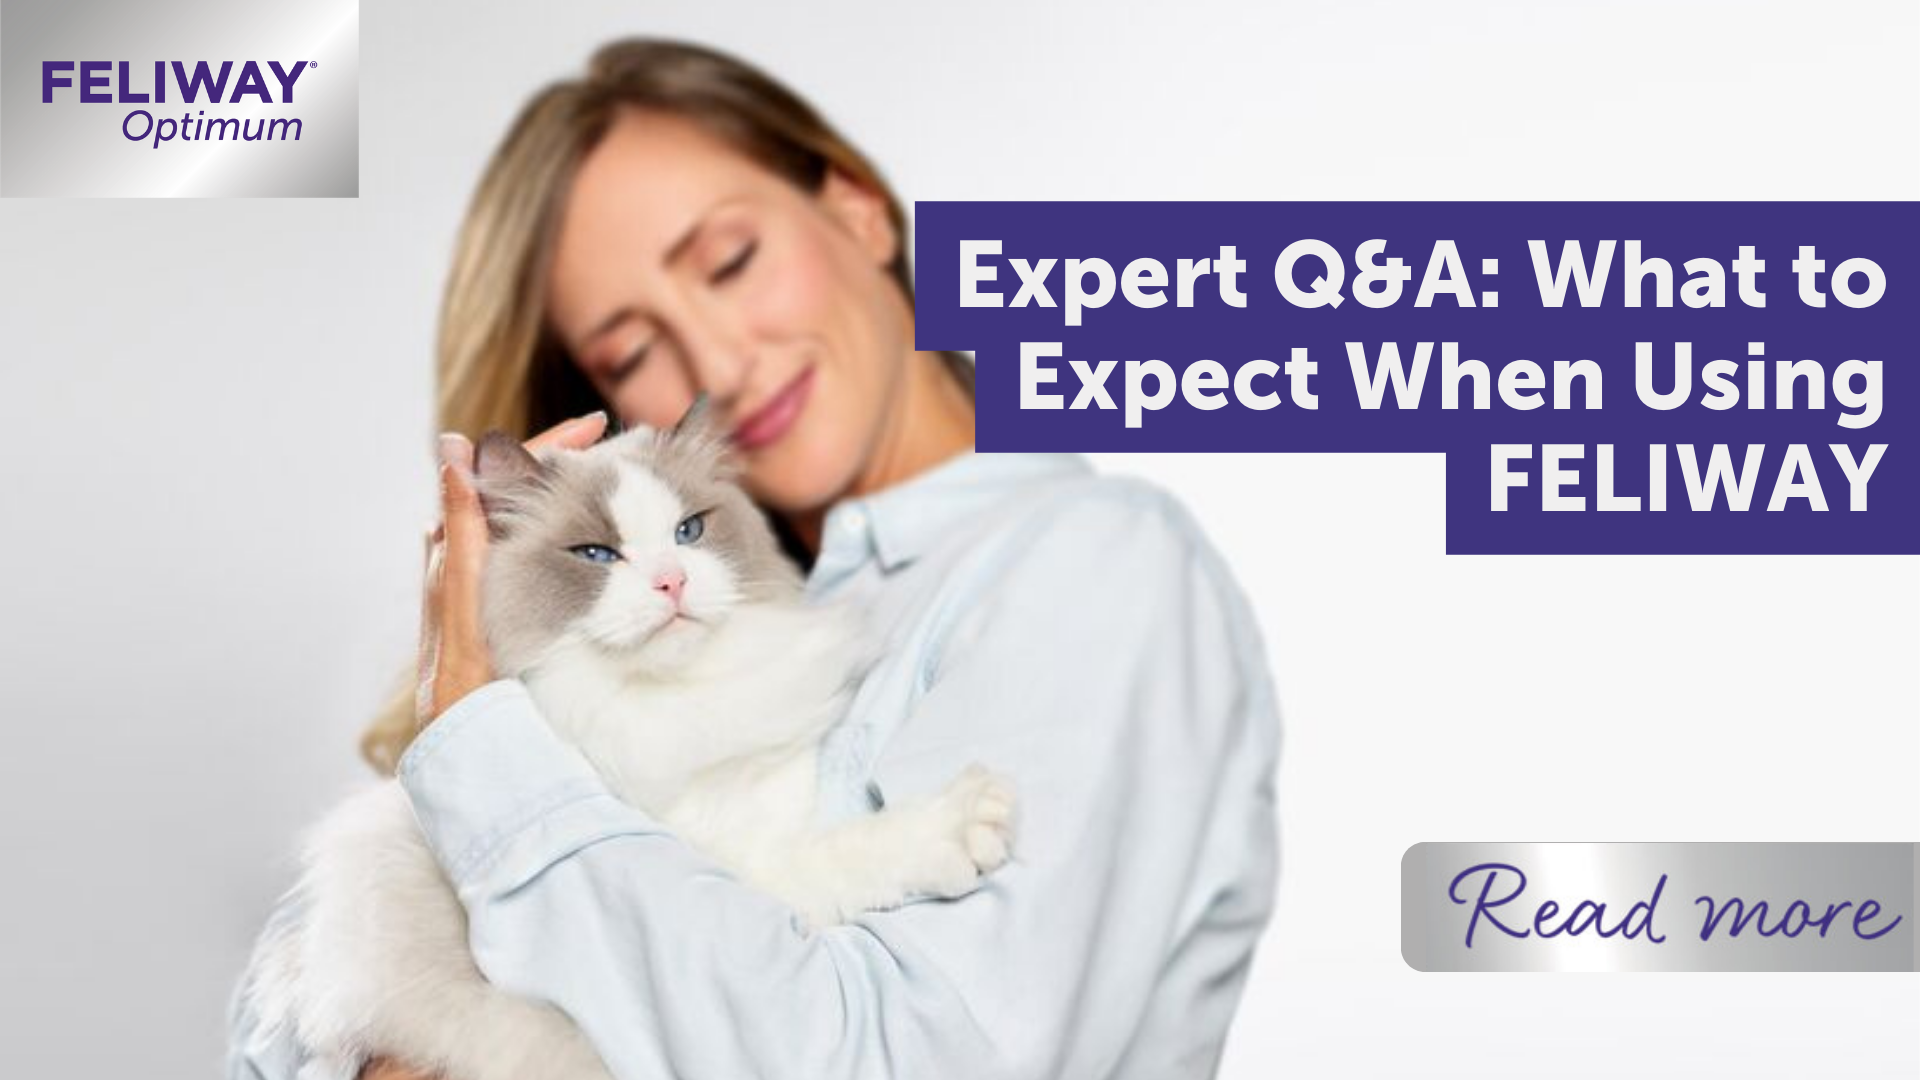 Expert Q&A: What to expect when using FELIWAY